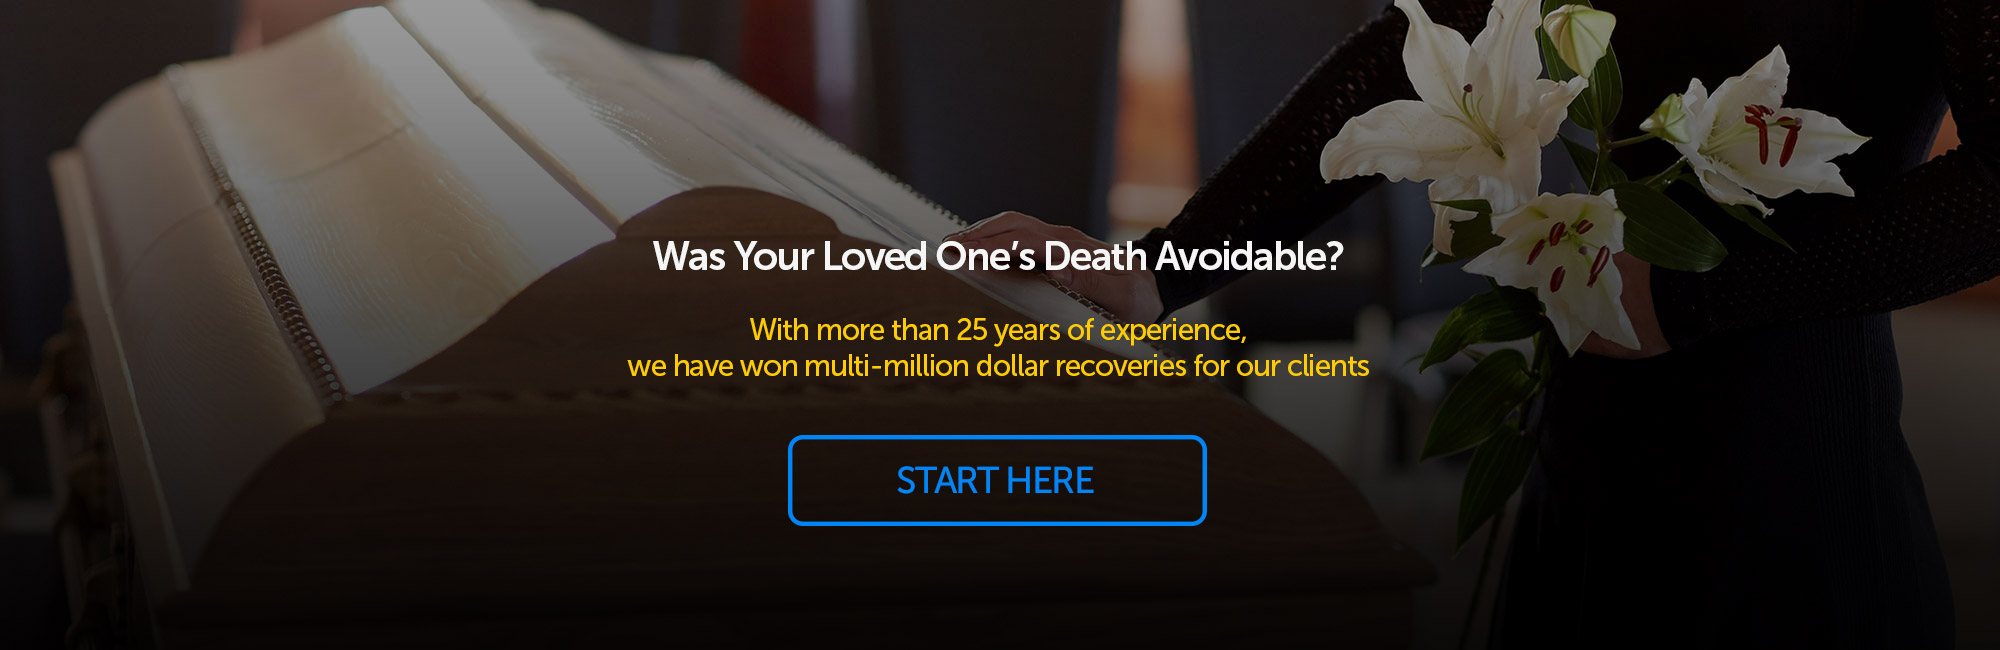 Was Your Loved One’s Death Avoidable?